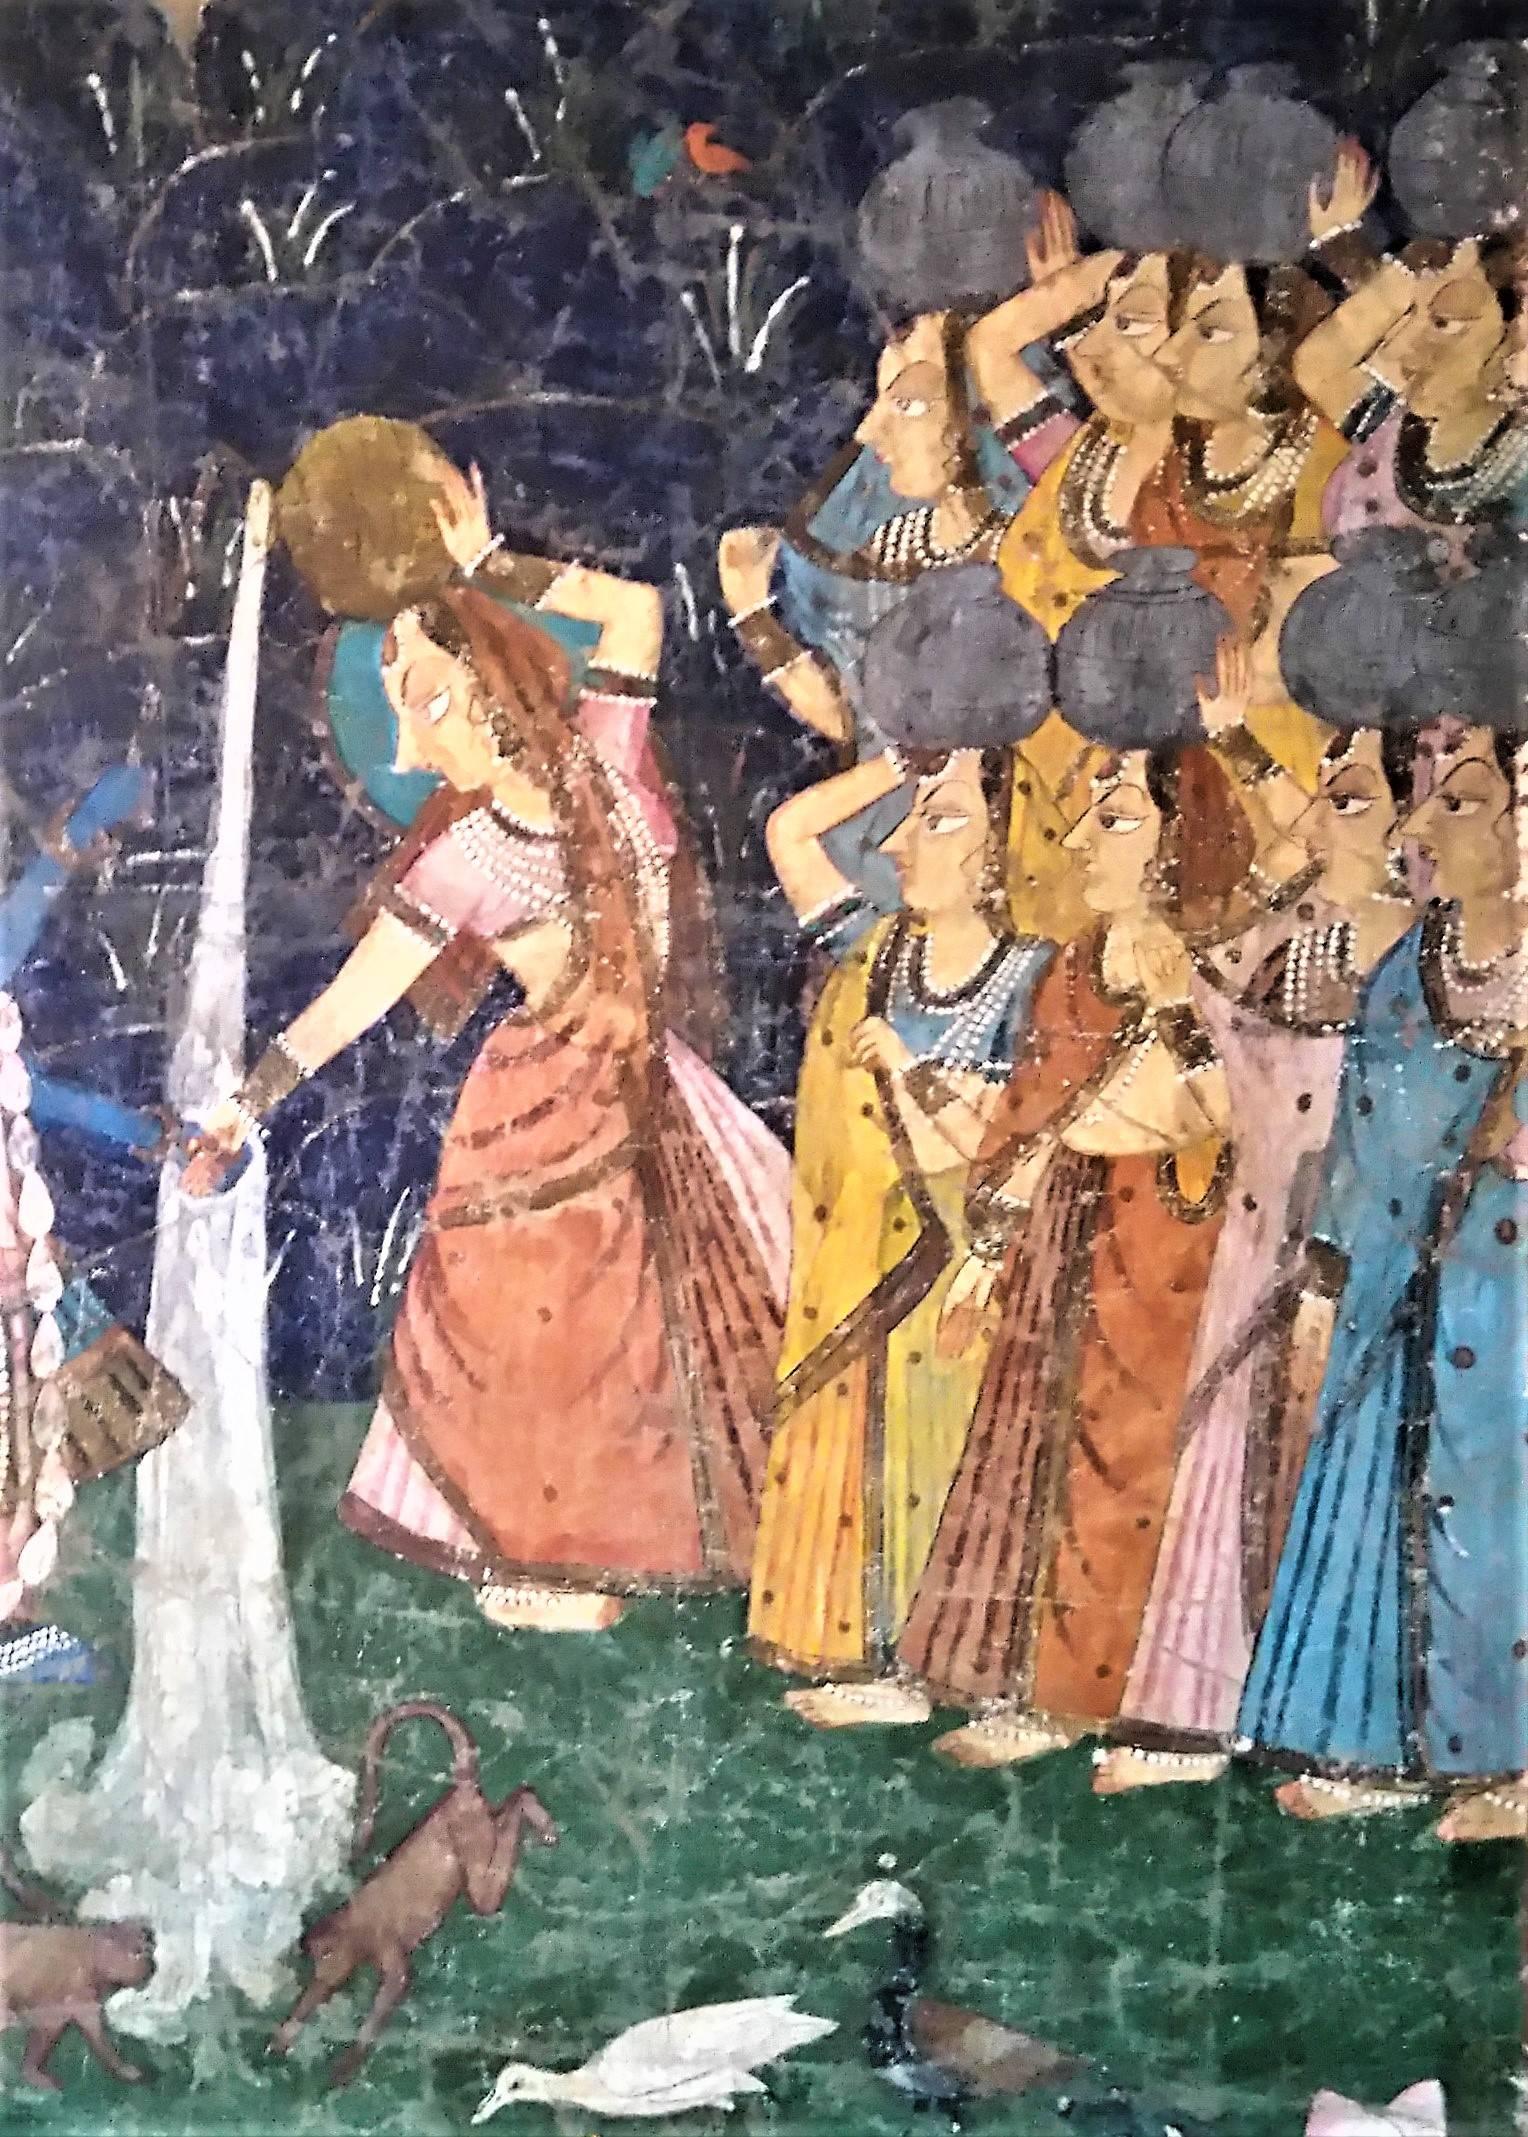 A Picchvai of the Dana Lila India, Rajasthan, 19th century 

Large 19th century temple wall hanging painted on silk. This beautiful painting depicts Krishna and his brother Balarama at the center. cowherders at left with gopis at right. The scene